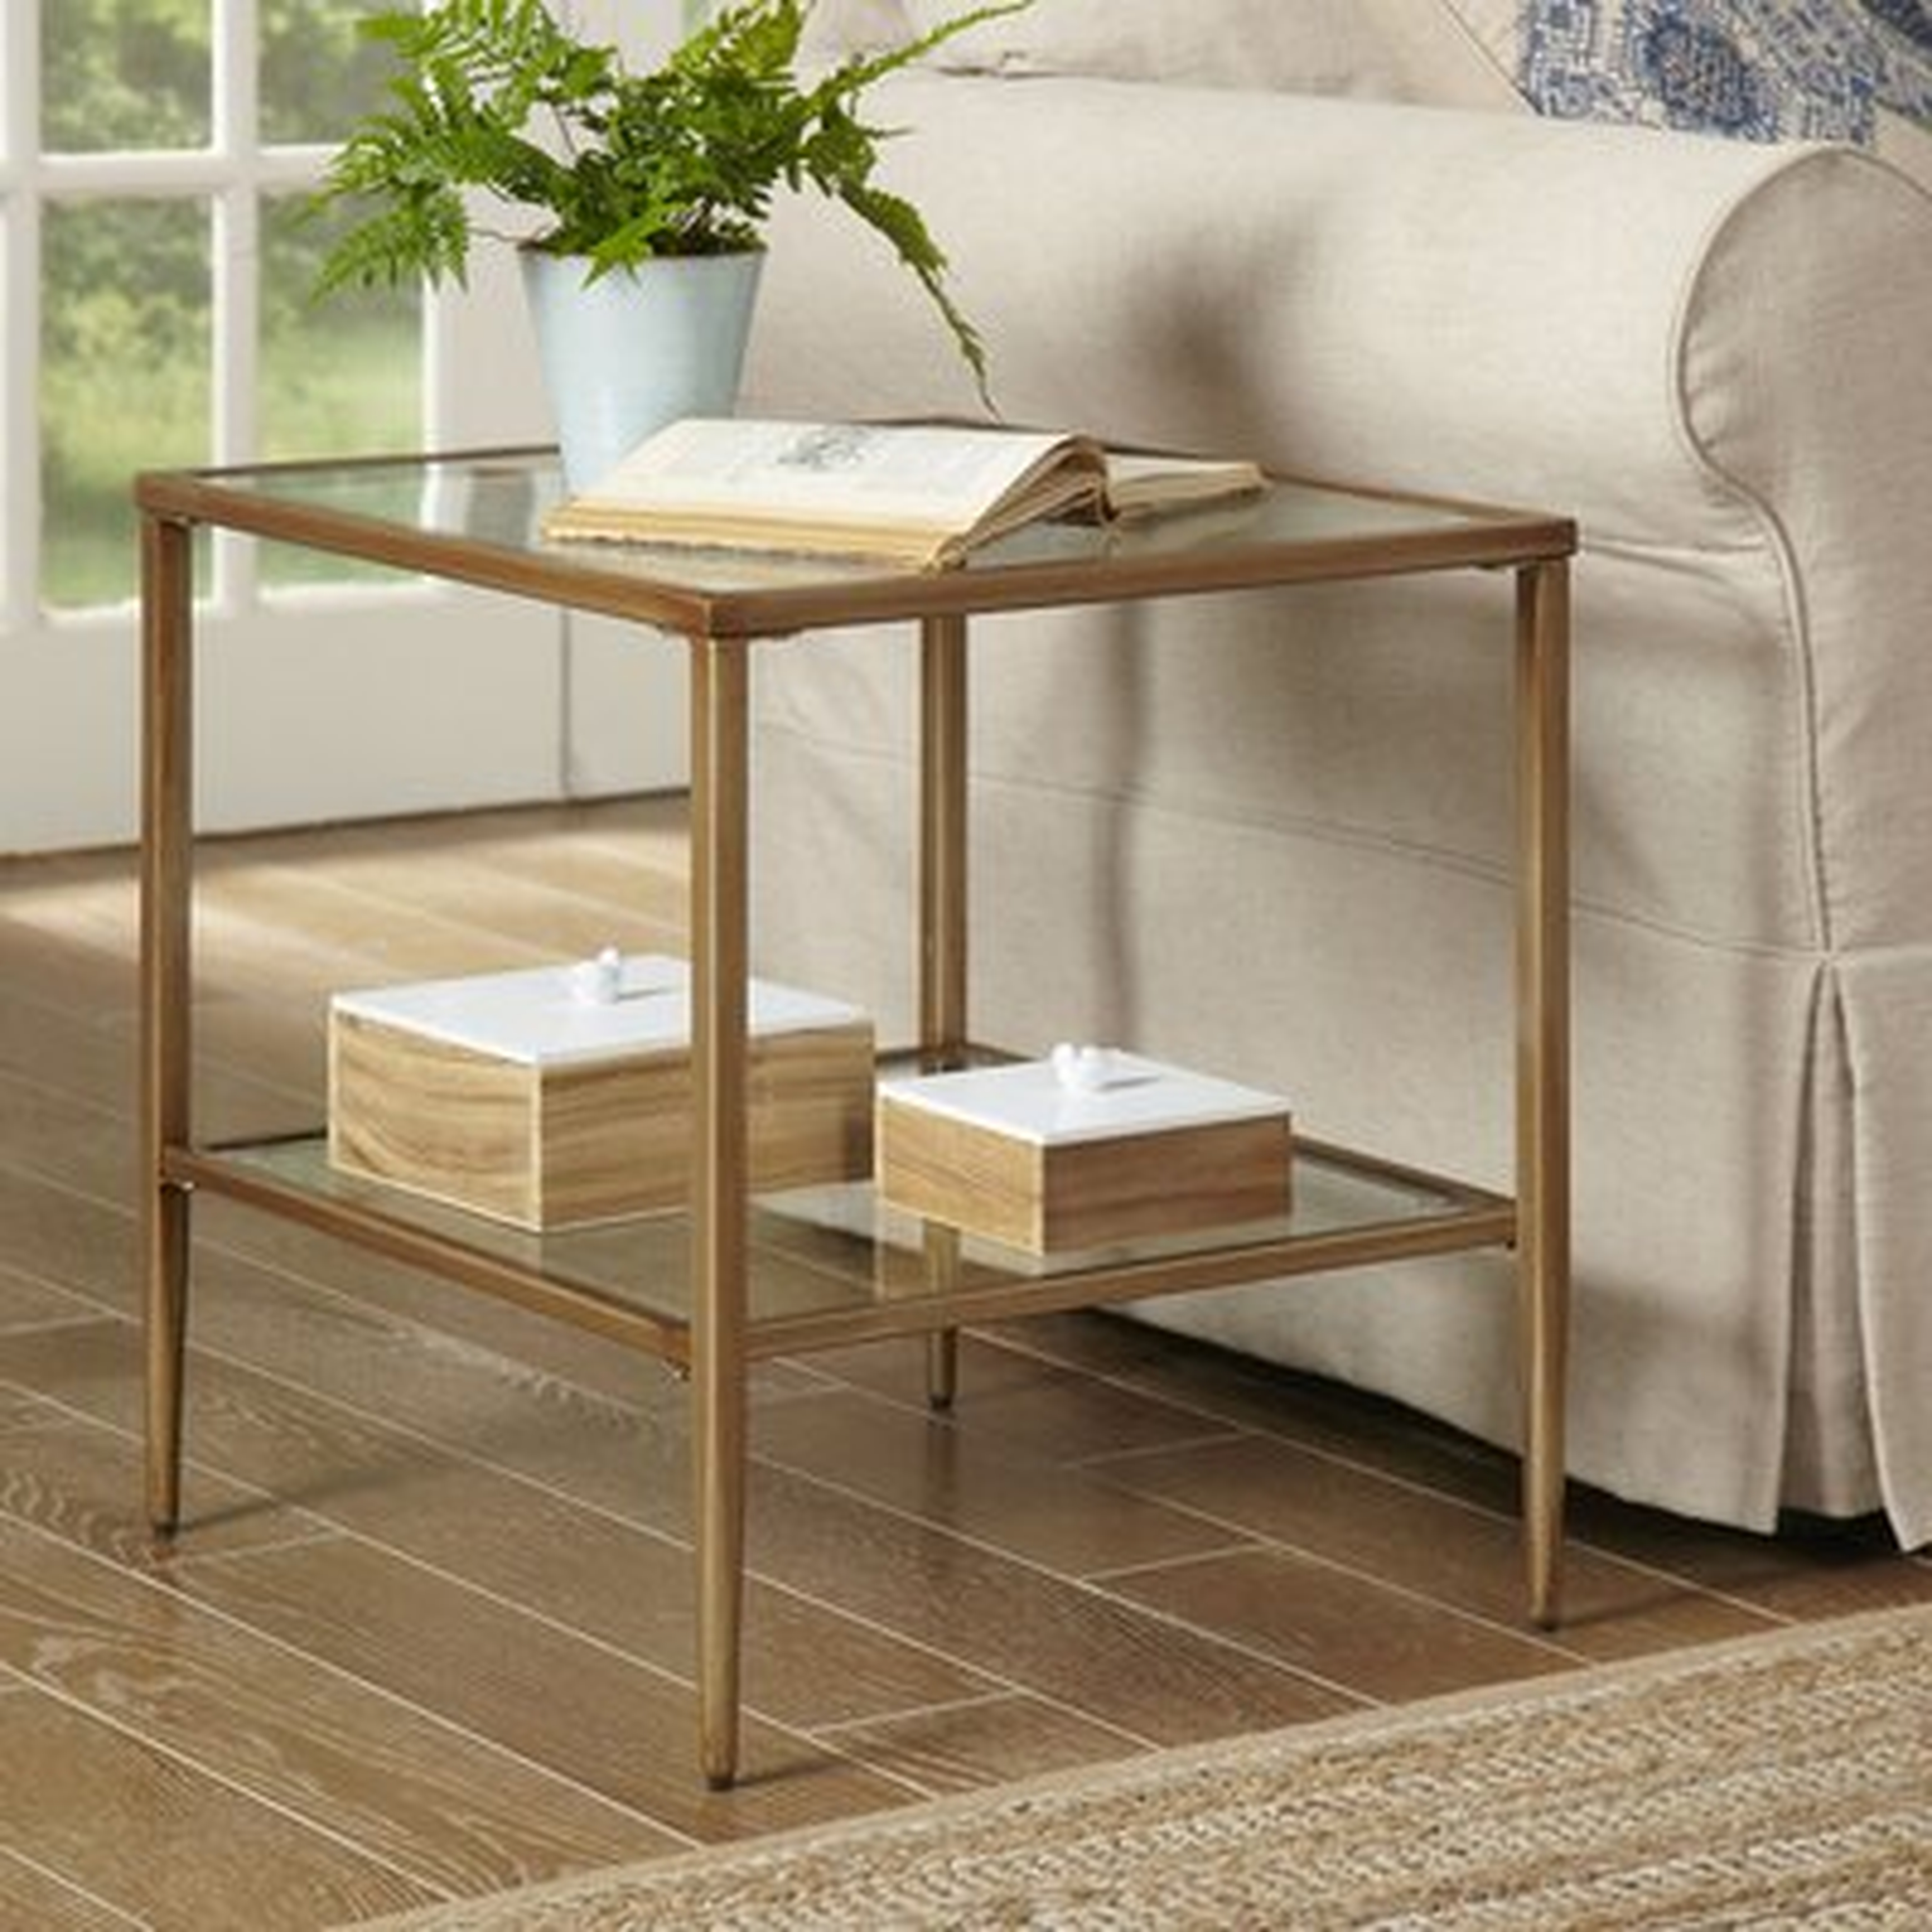 Double Glass Top End Table with Storage - Wayfair